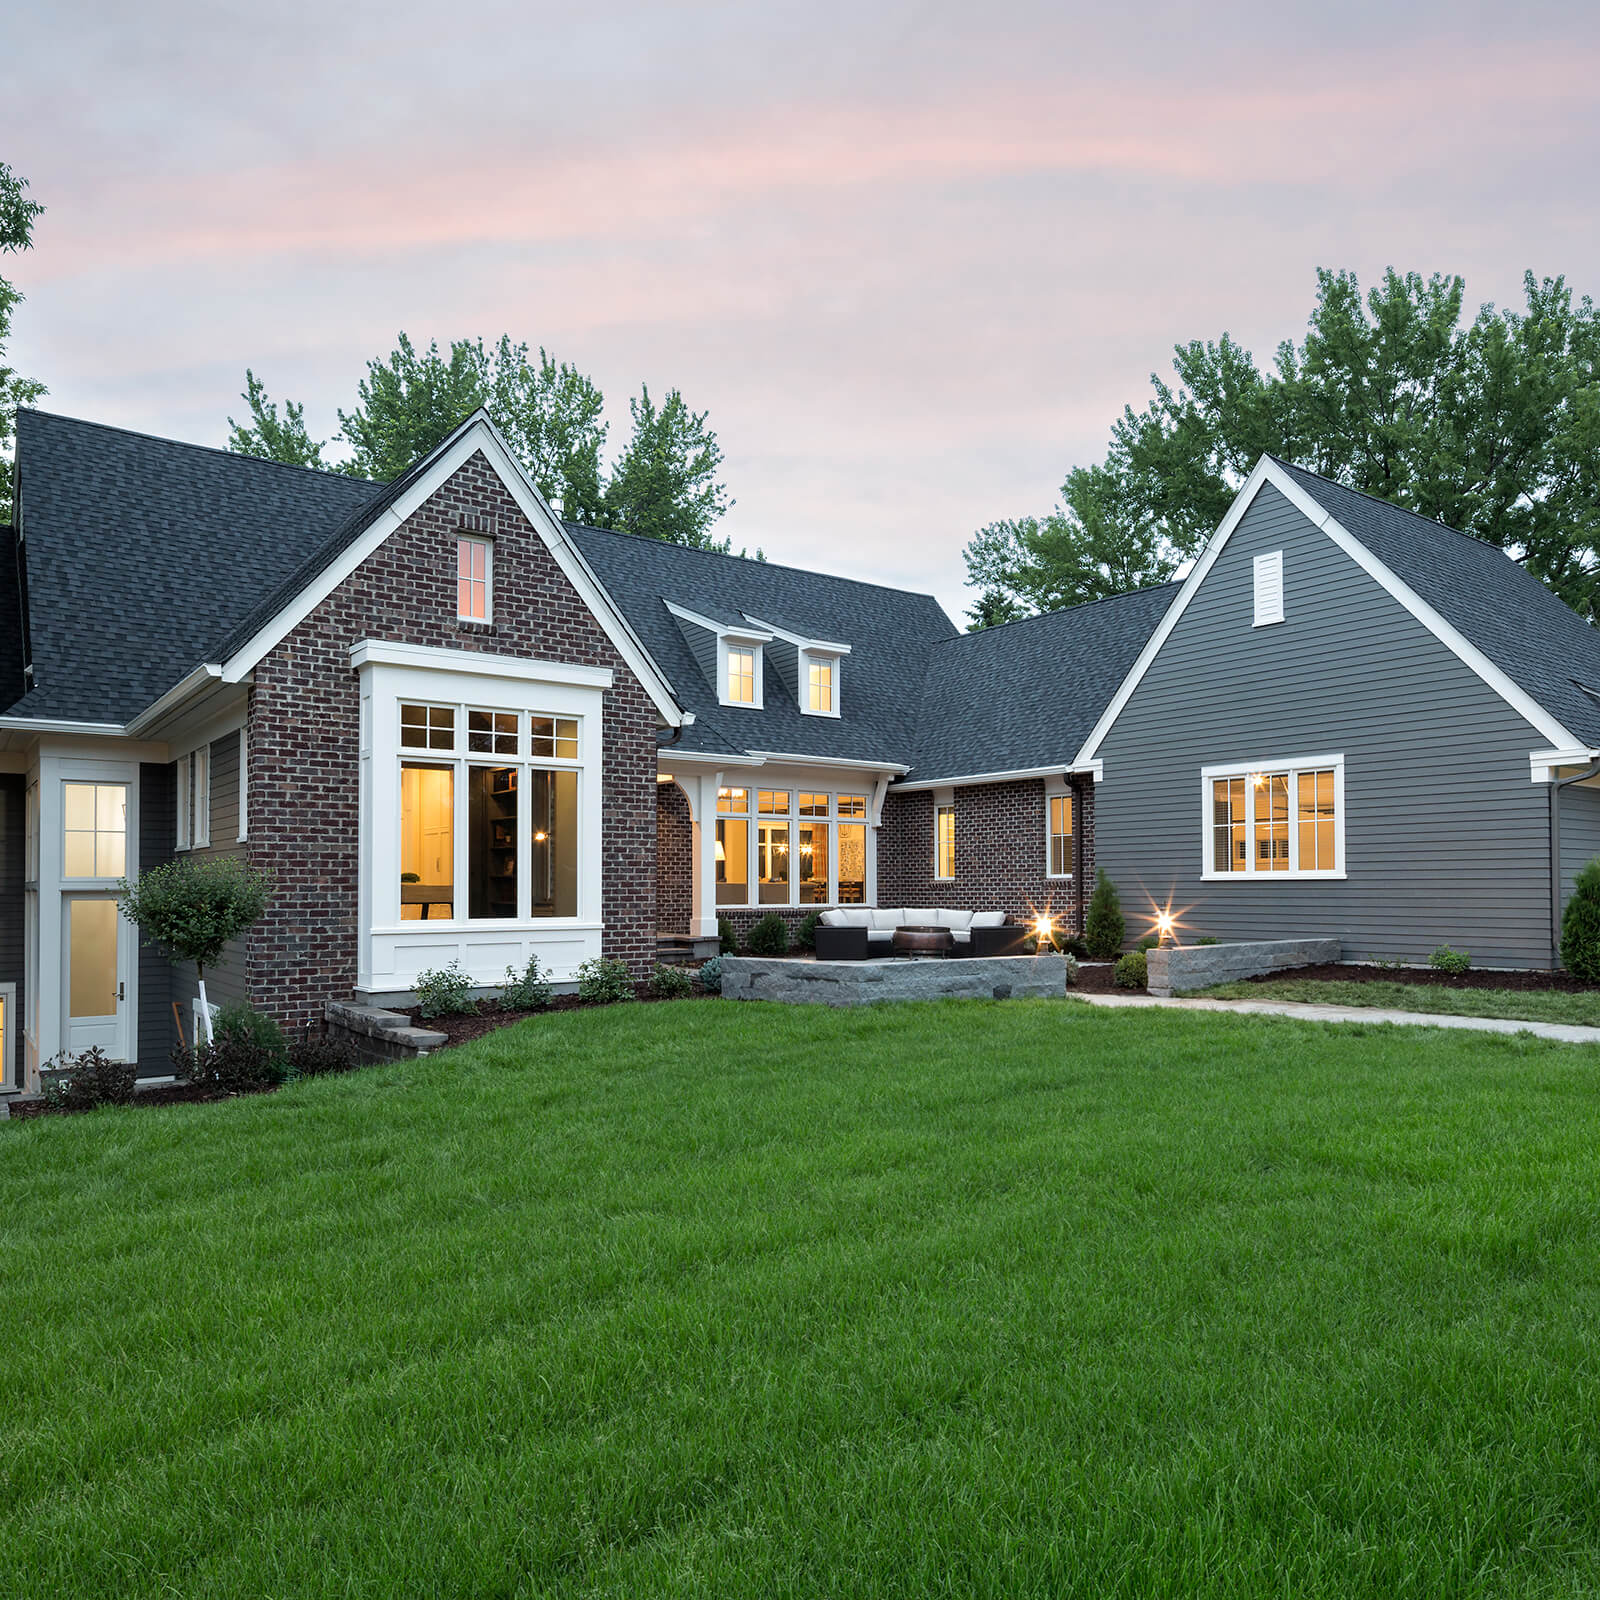 Exterior of home with blue siding and brick facade with Marvin Signature Ultimate Casement Windows